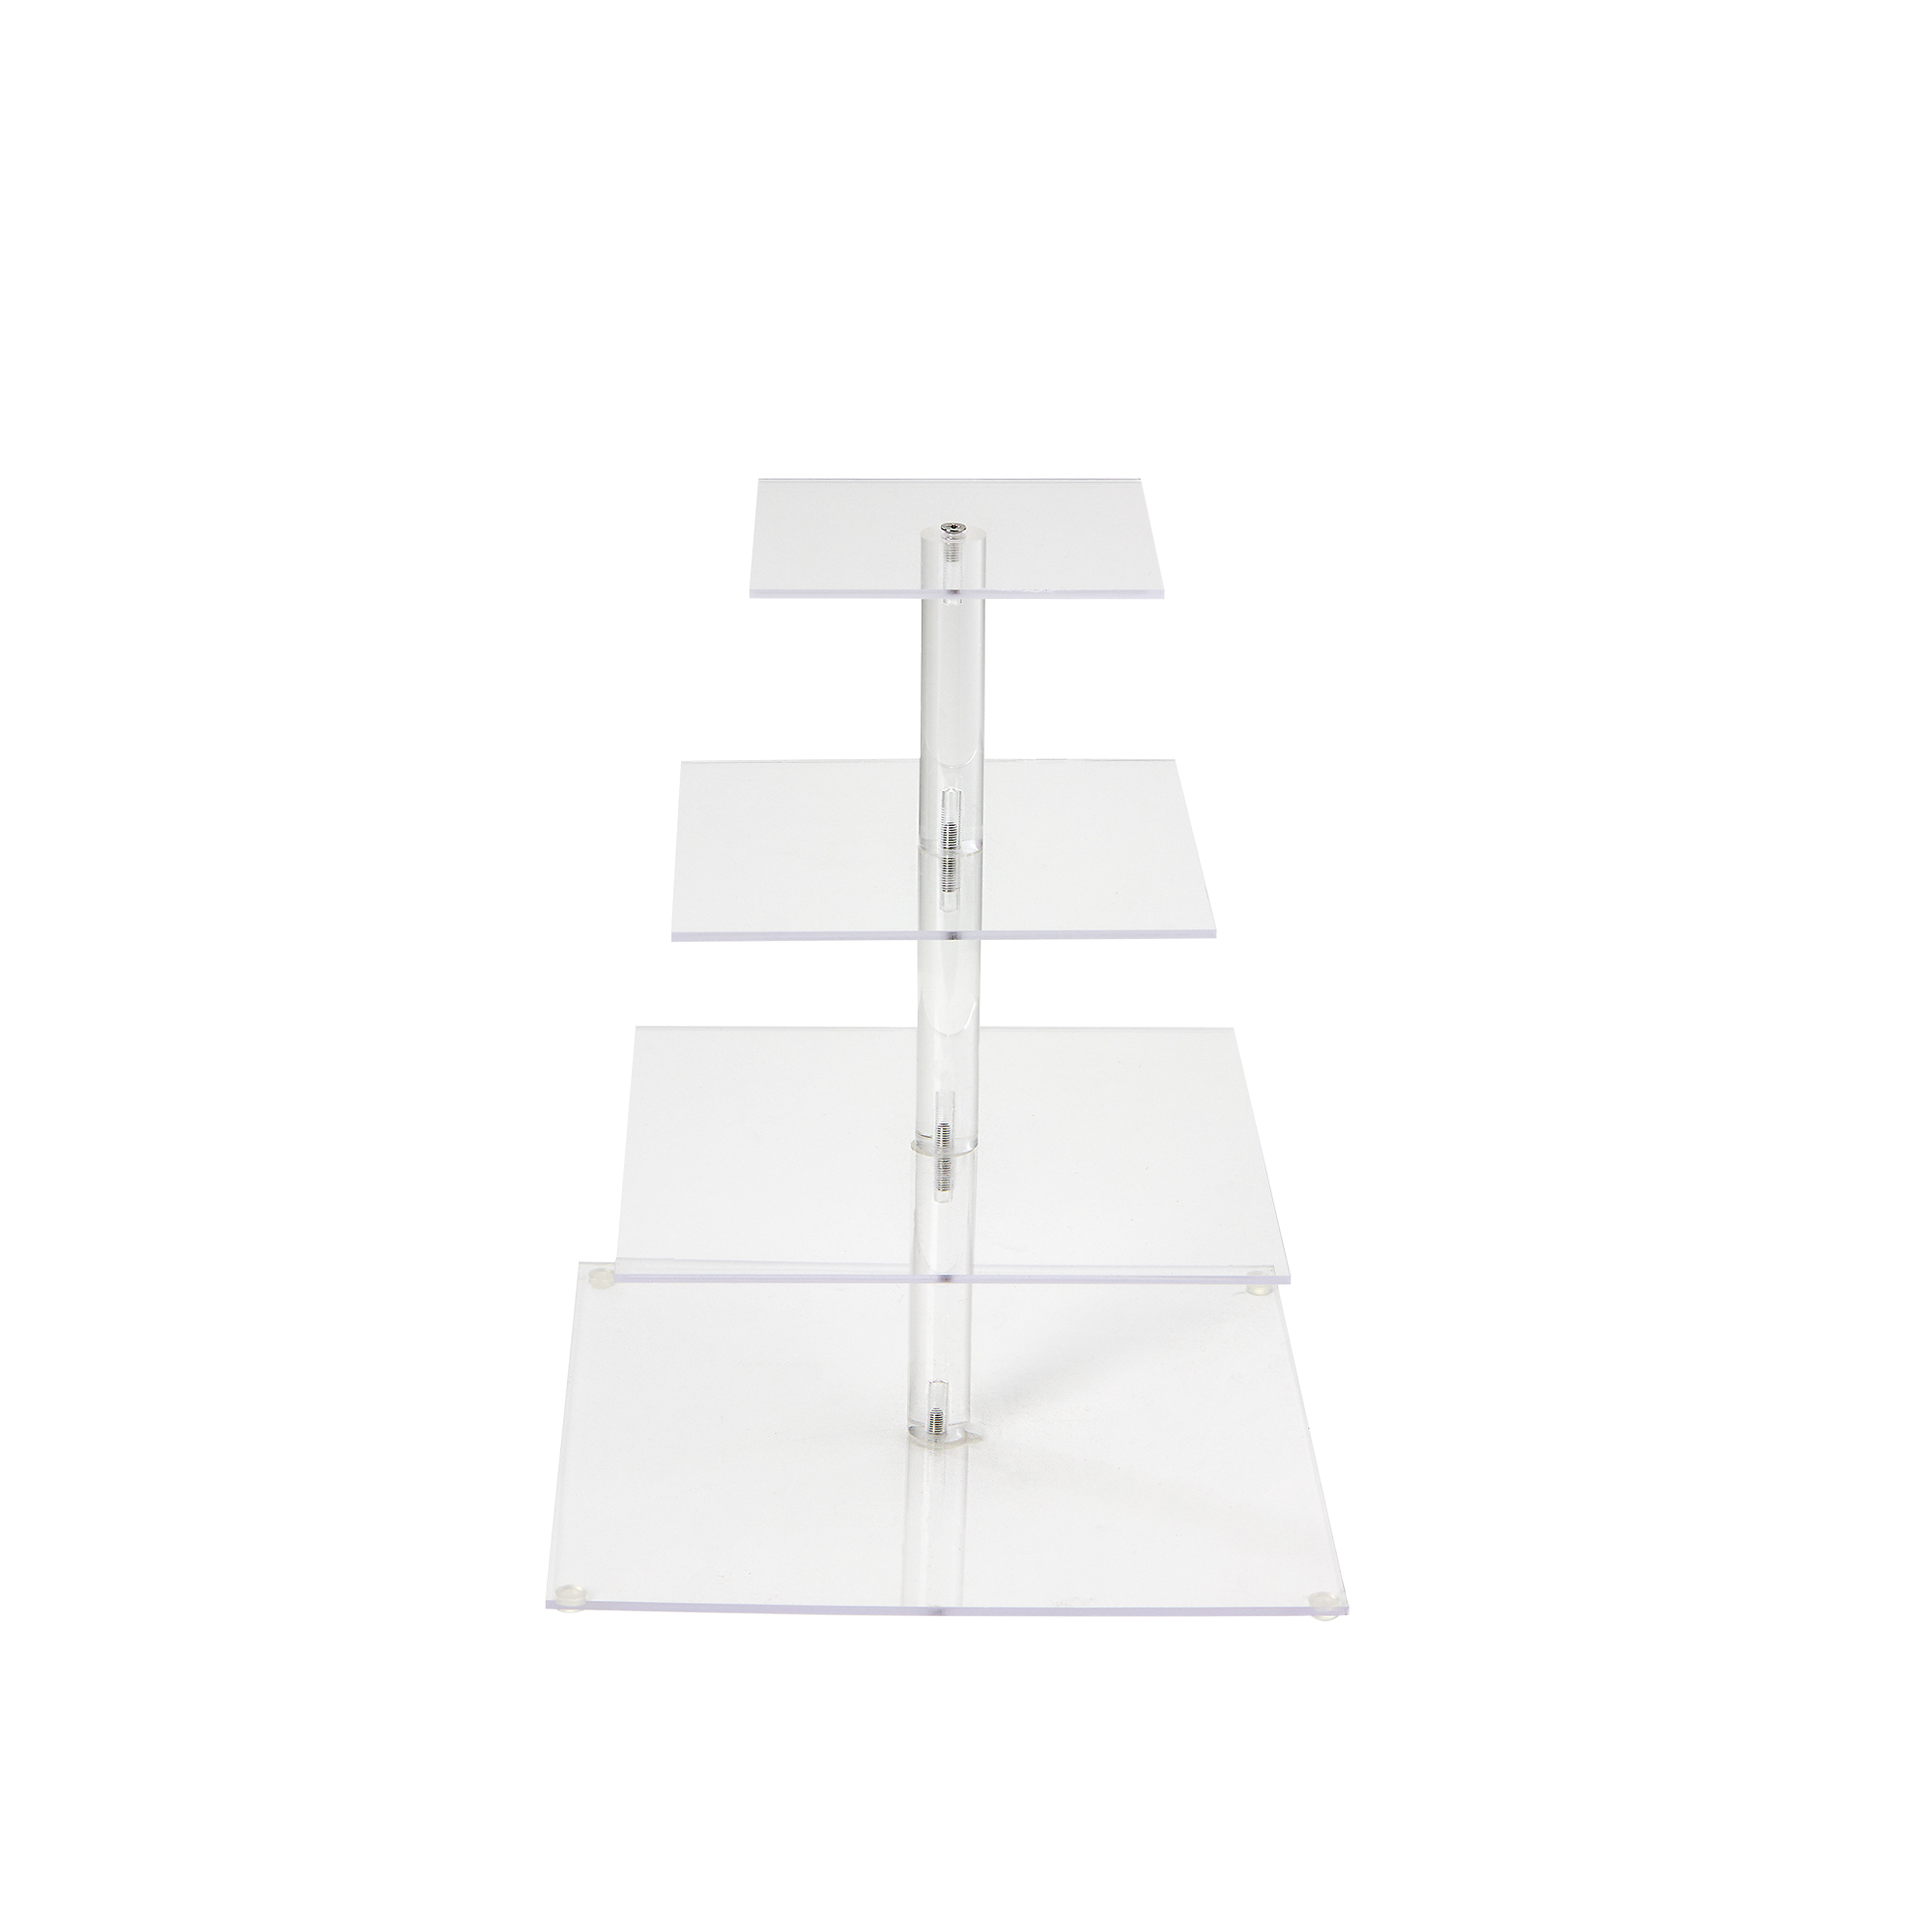 4 Layer Square Acrylic Treat Stand 15“ - Clear